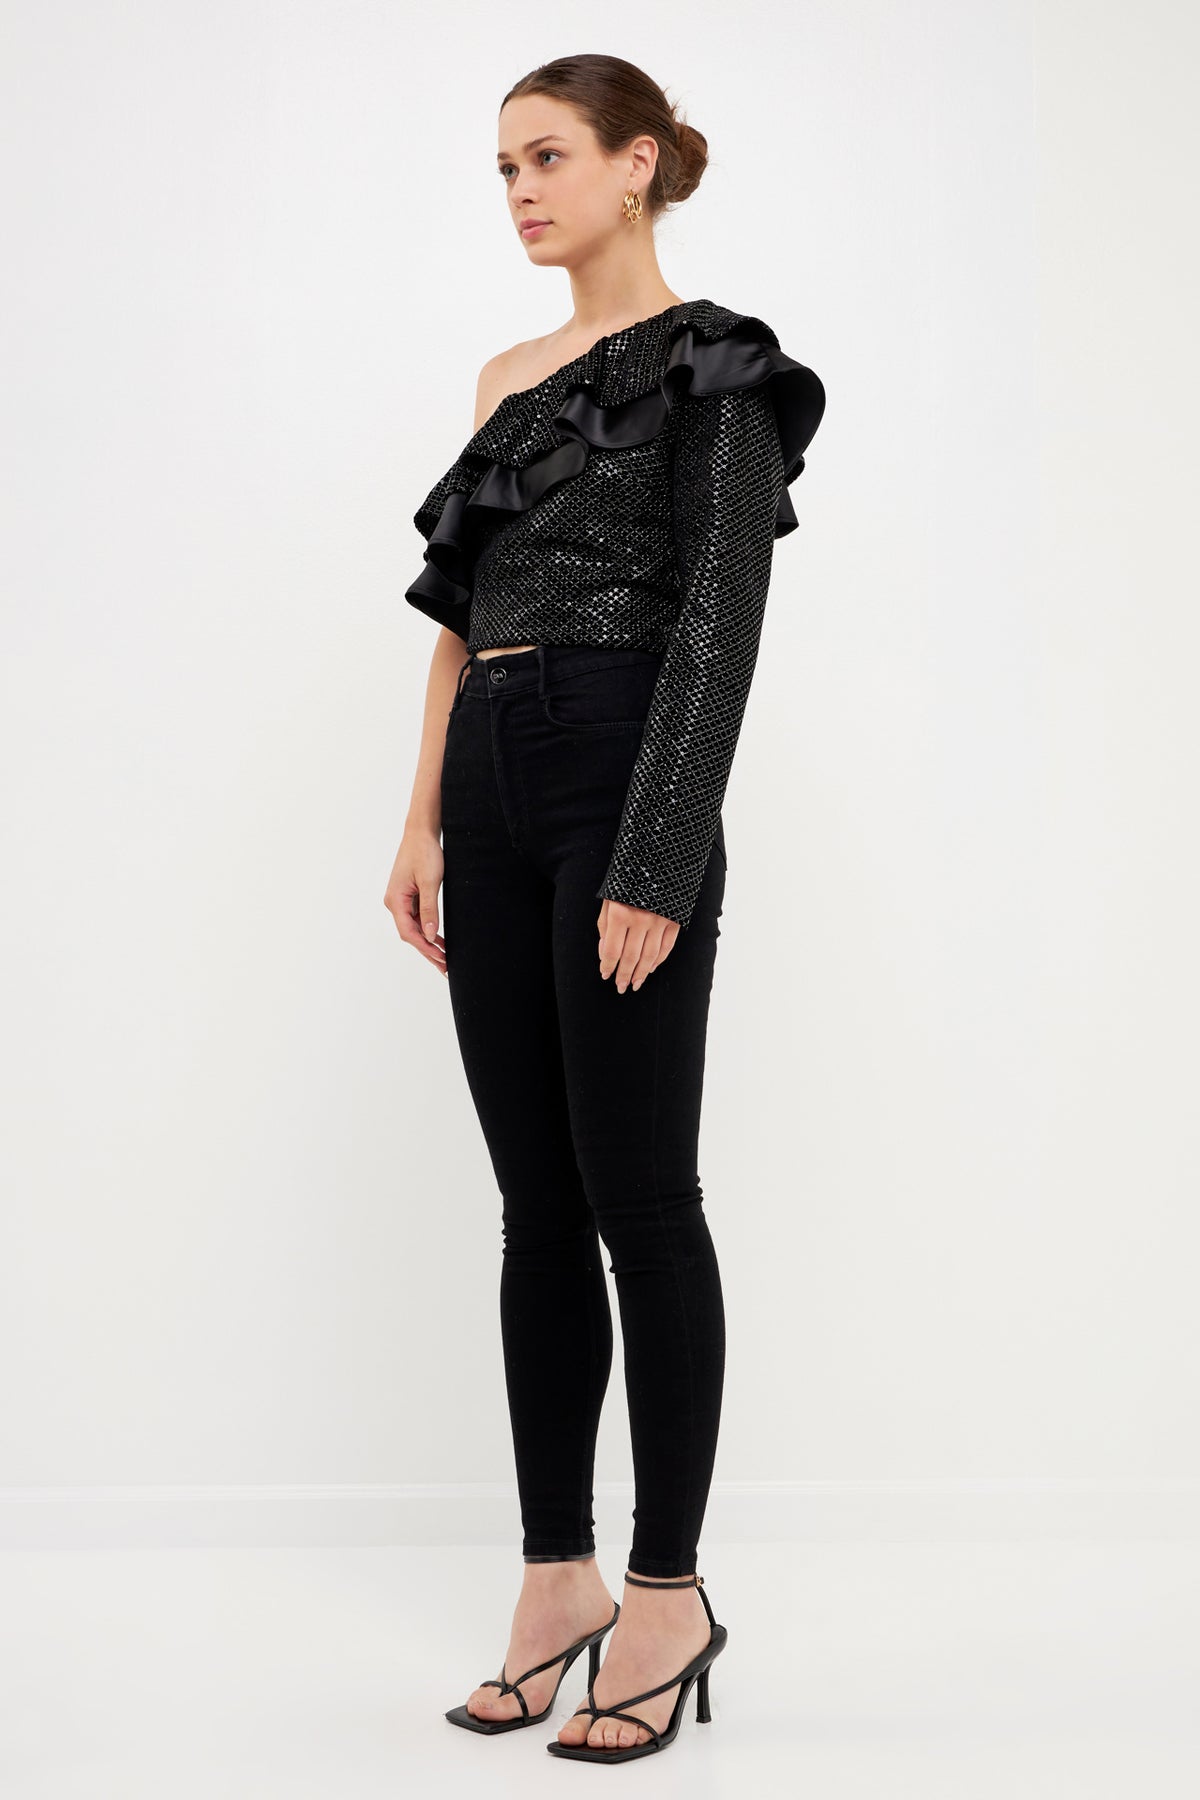 ENDLESS ROSE - One Shoulder Sequin Top - TOPS available at Objectrare